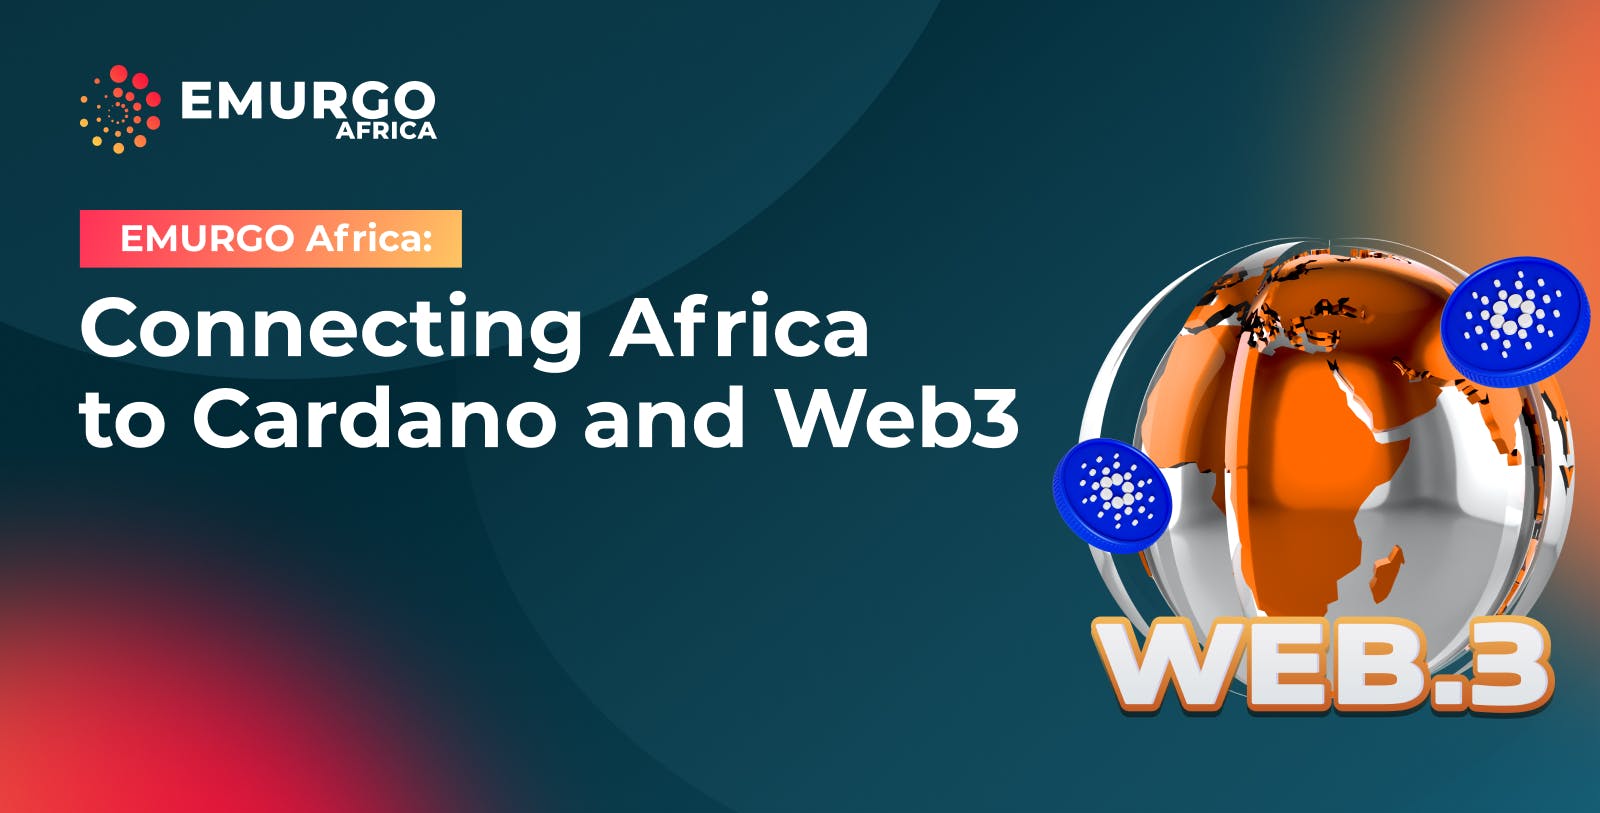 EMURGO-Africa_-Connecting-Africa-to-Cardano-and-Web3.jpg